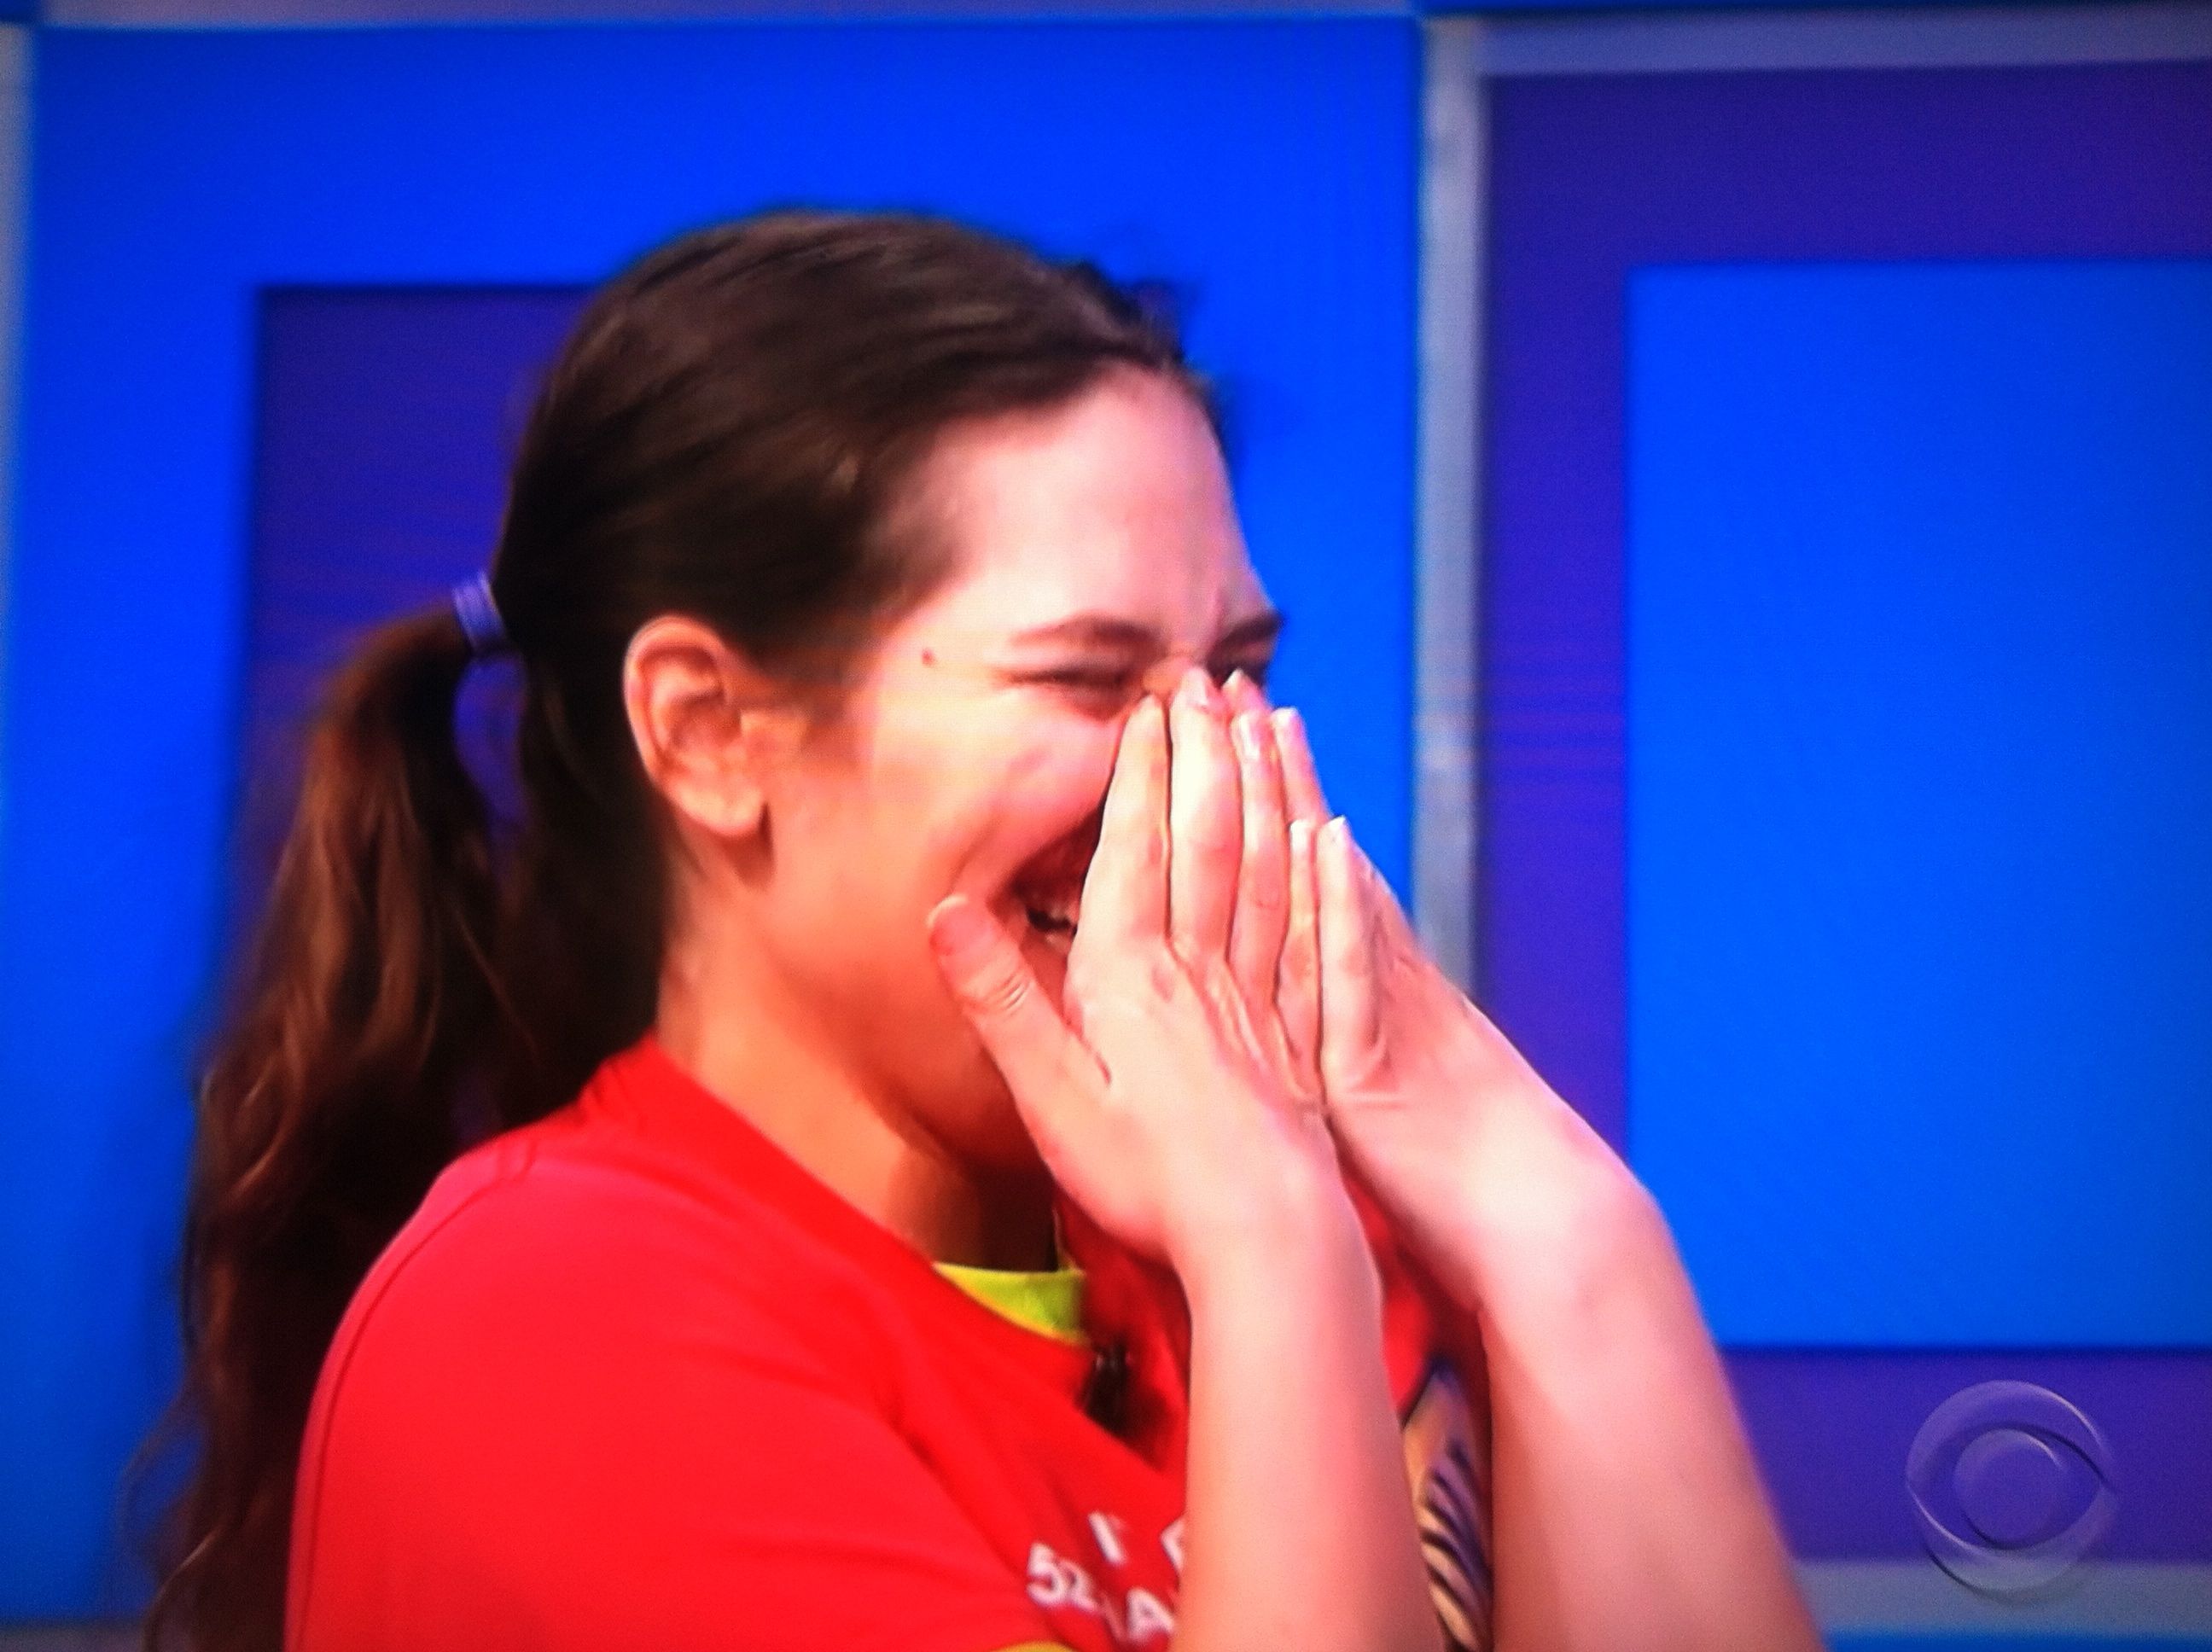 Aurora De Lucia laughing on The Price is Right